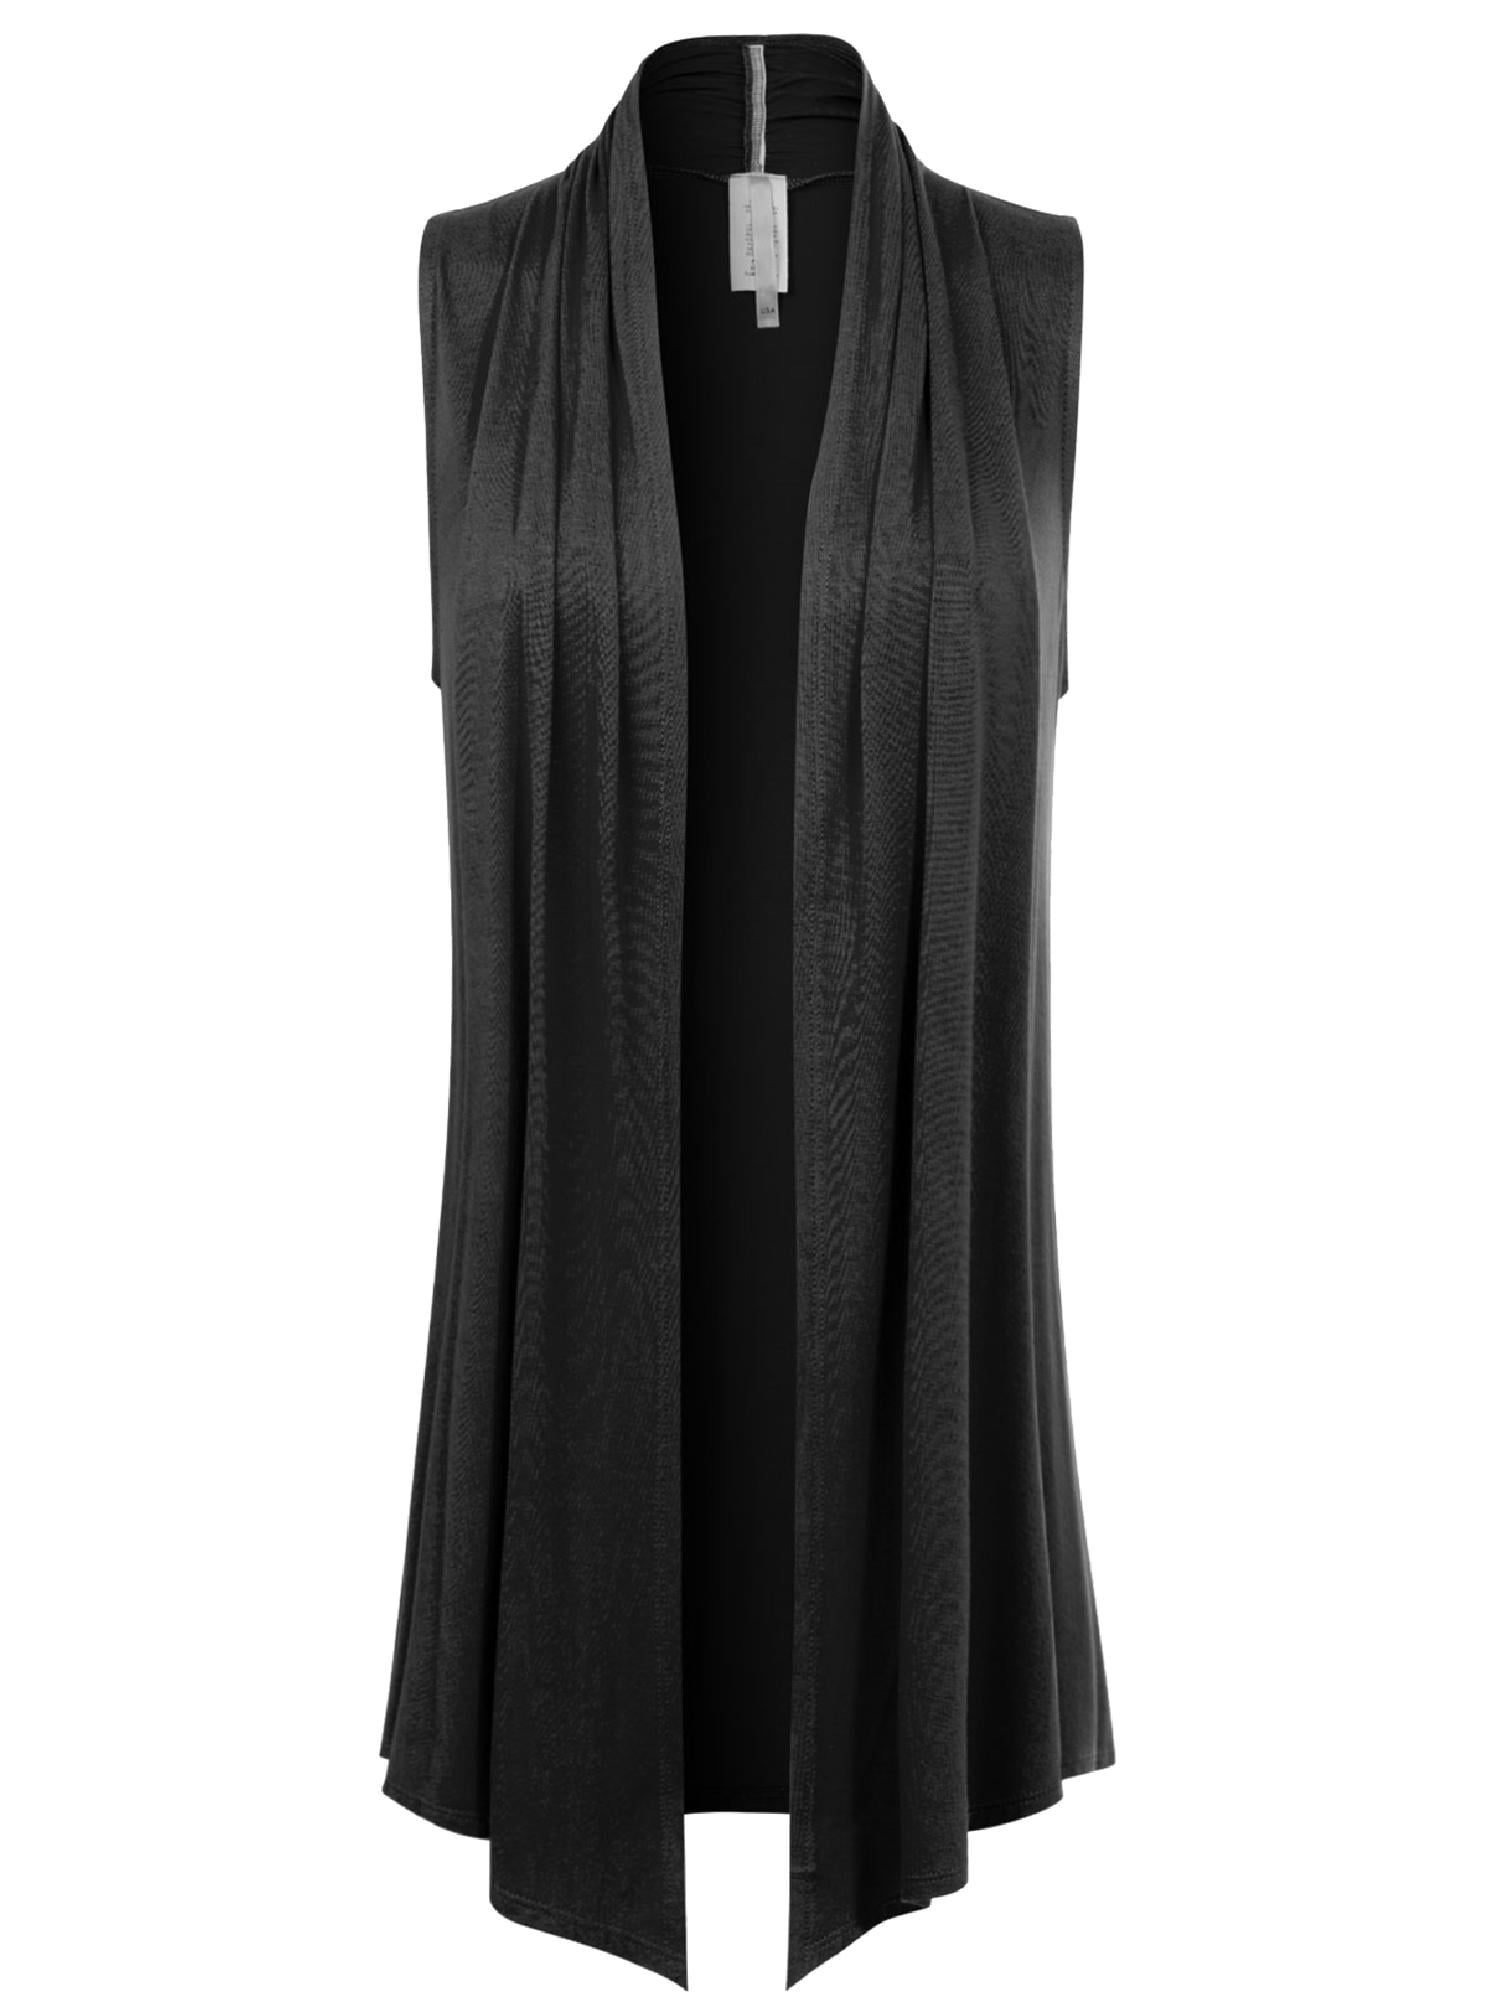 Made in USA Open Front Draped Waterfall Sleeveless Shawl Cardigan Vest Design by Olivia Womens S-3XL